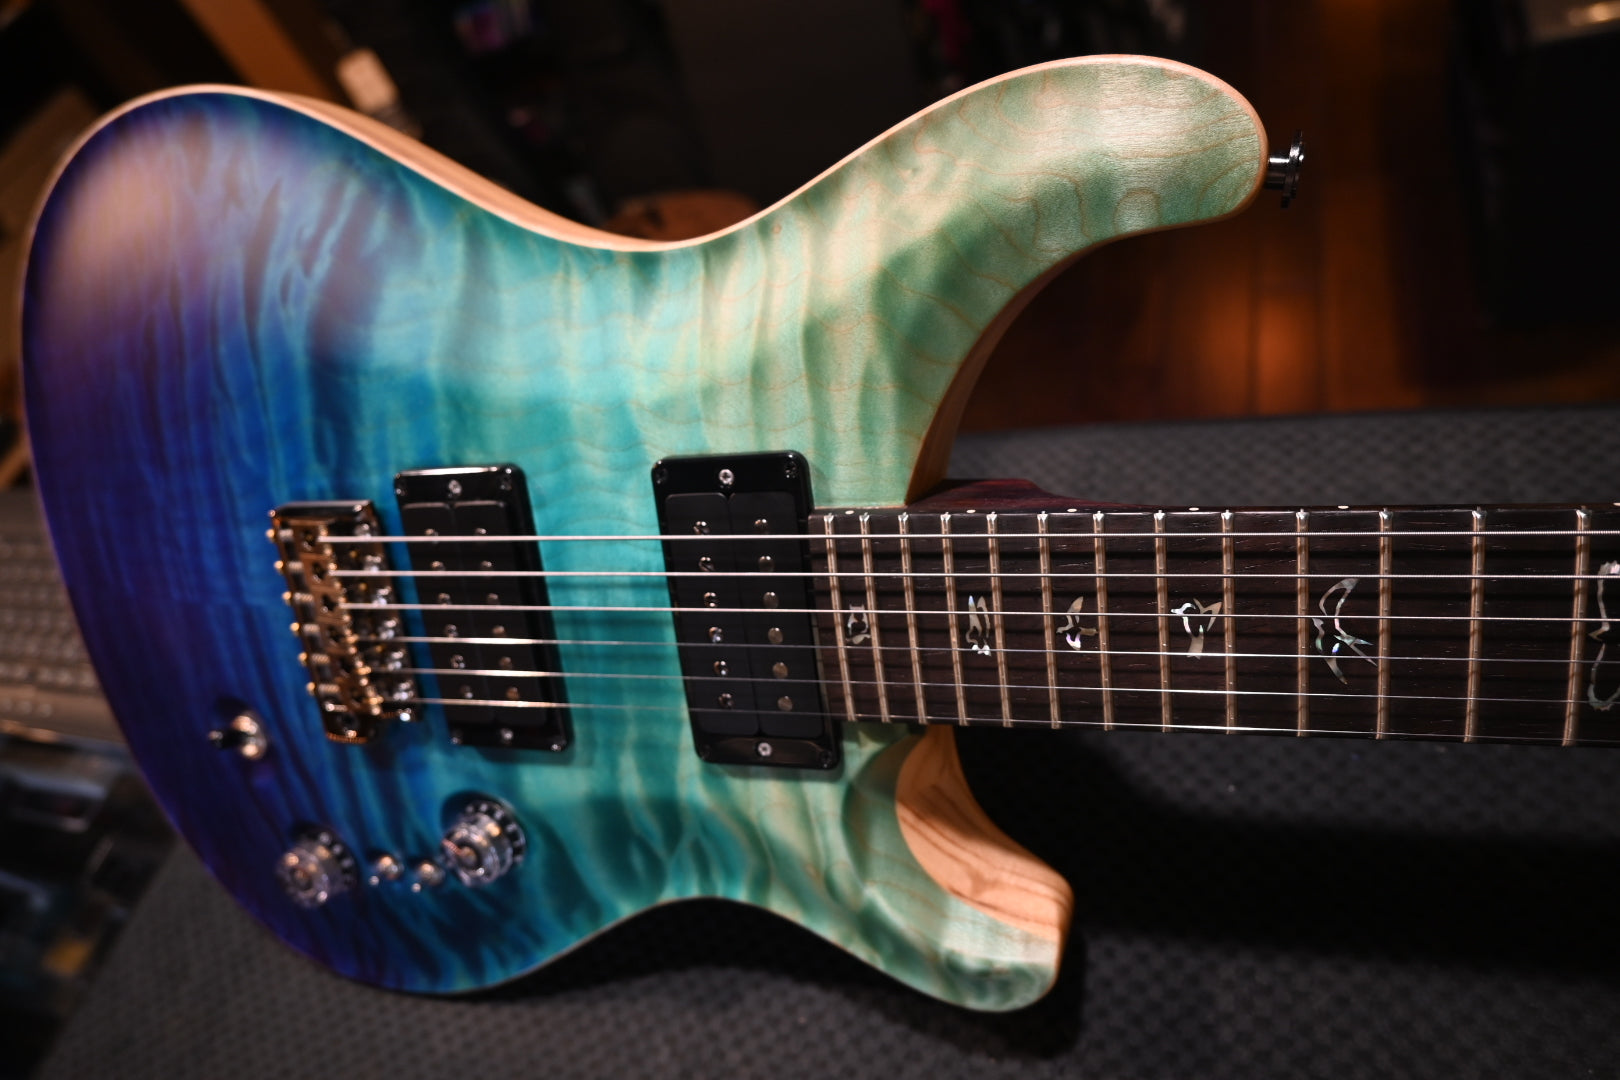 PRS Wood Library Custom 24-08 10-Top Quilt Rosewood Neck BRW - Blue Fade Satin Guitar #7532 - Danville Music